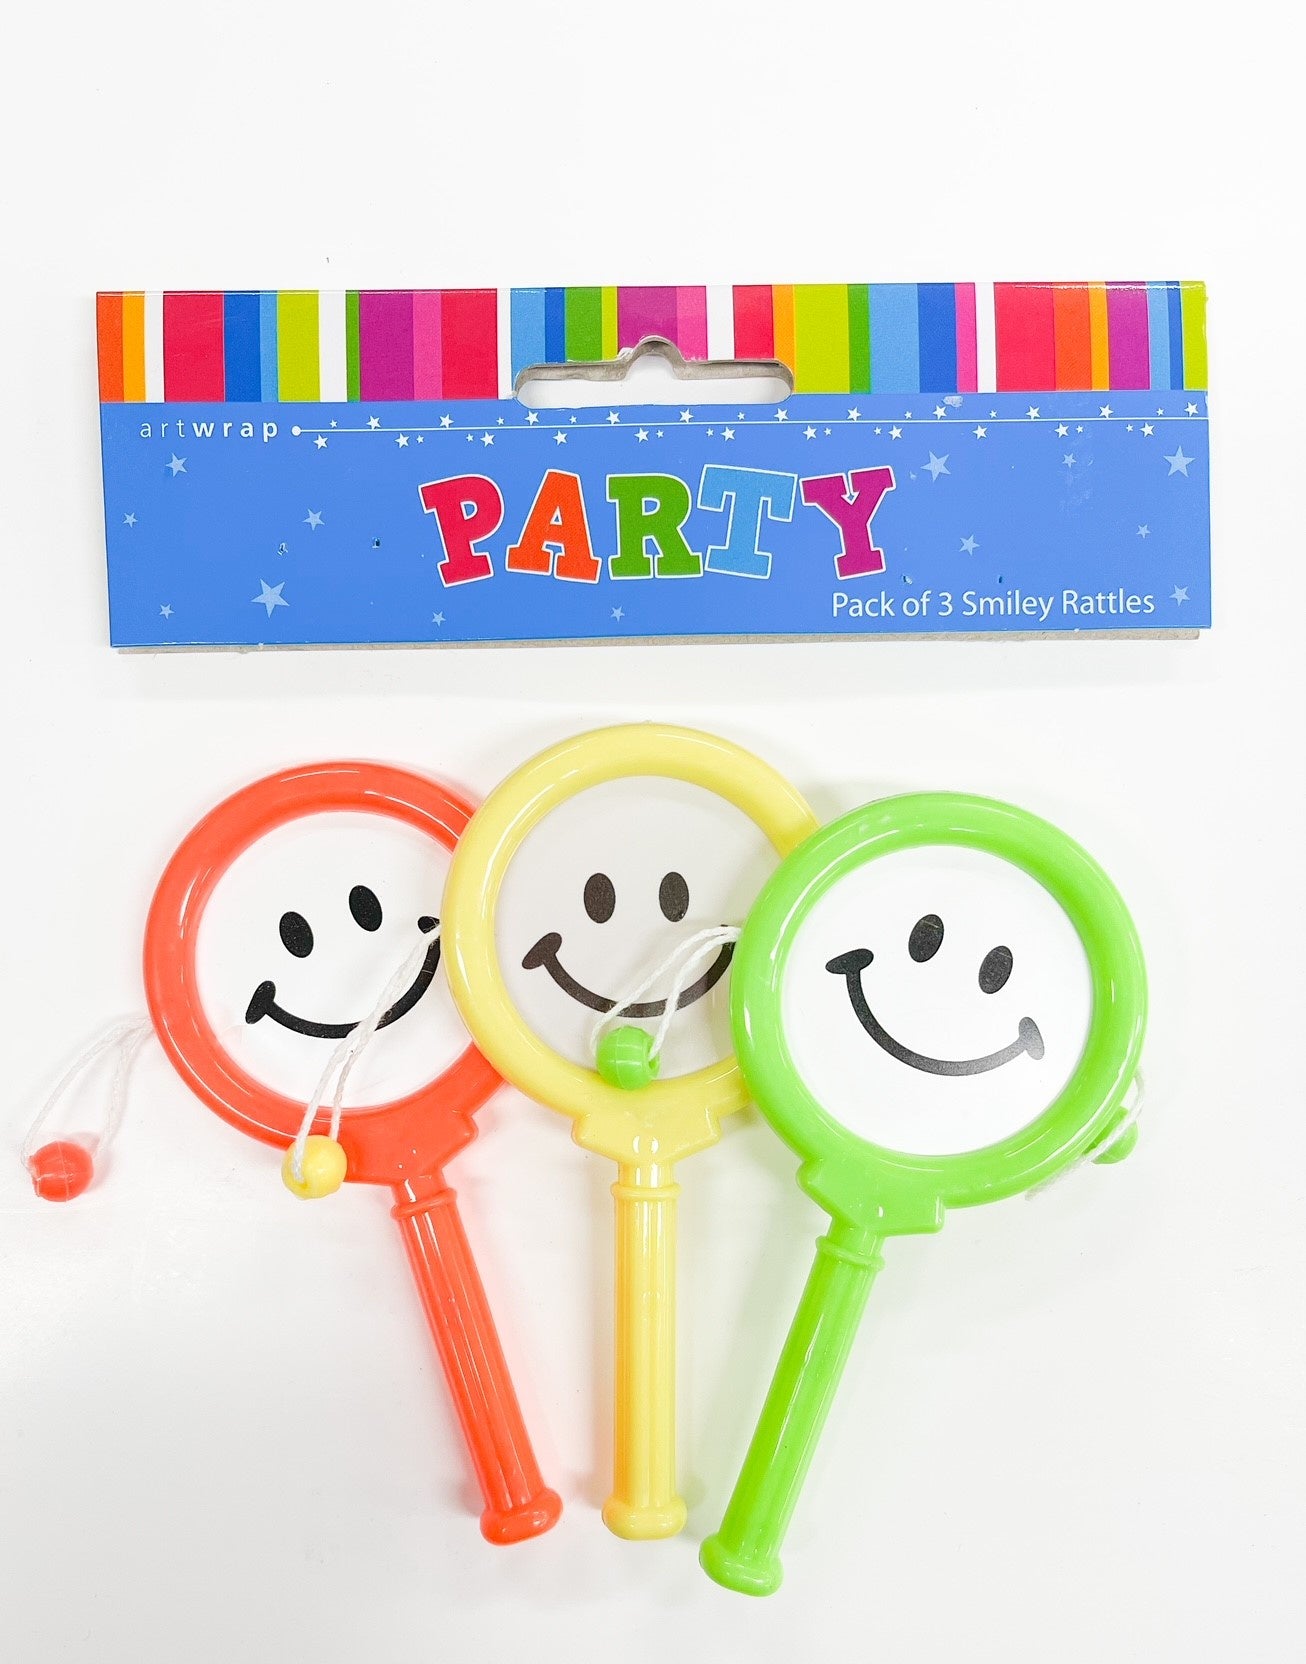 Smiley Rattle Party Favours Pack of 3